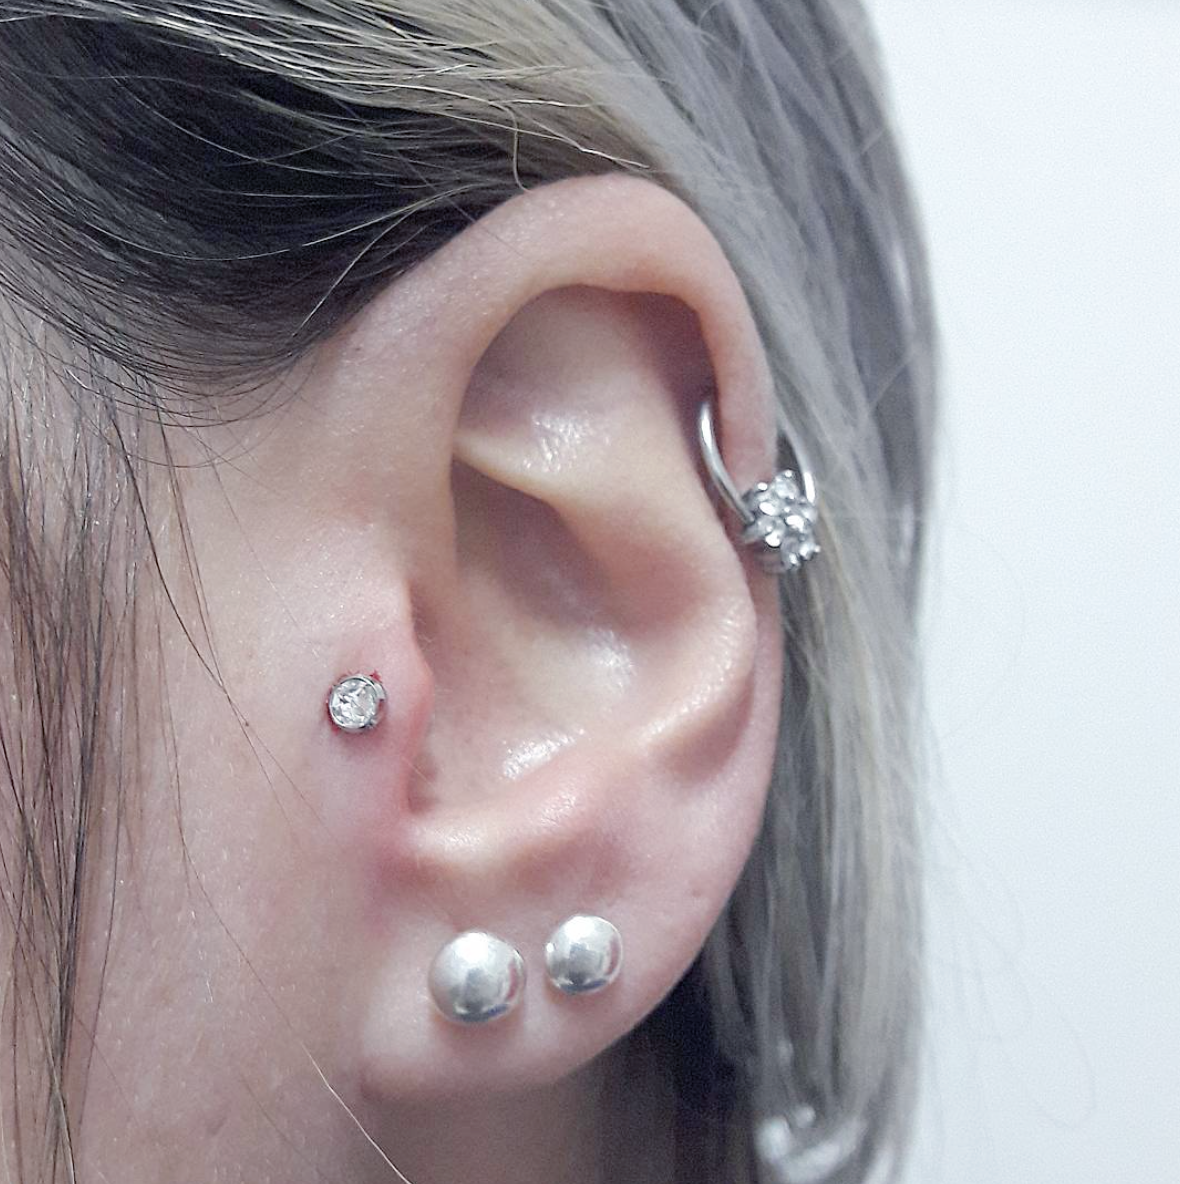 ENTITY reports on everything you need to know before getting a tragus piercing.